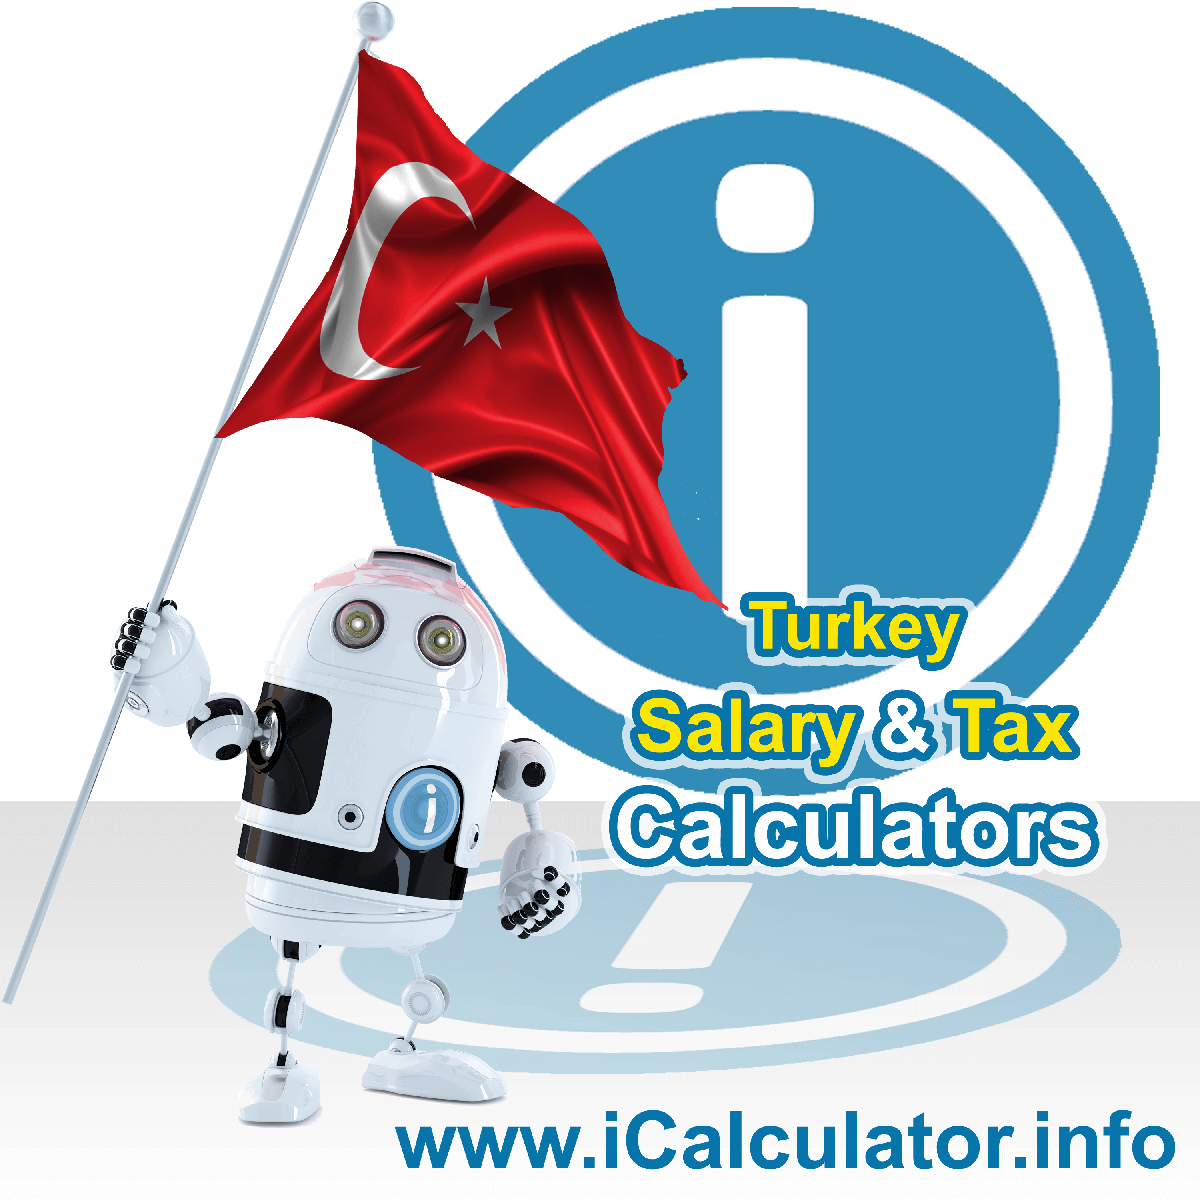 Turkey Wage Calculator. This image shows the Turkey flag and information relating to the tax formula for the Turkey Tax Calculator